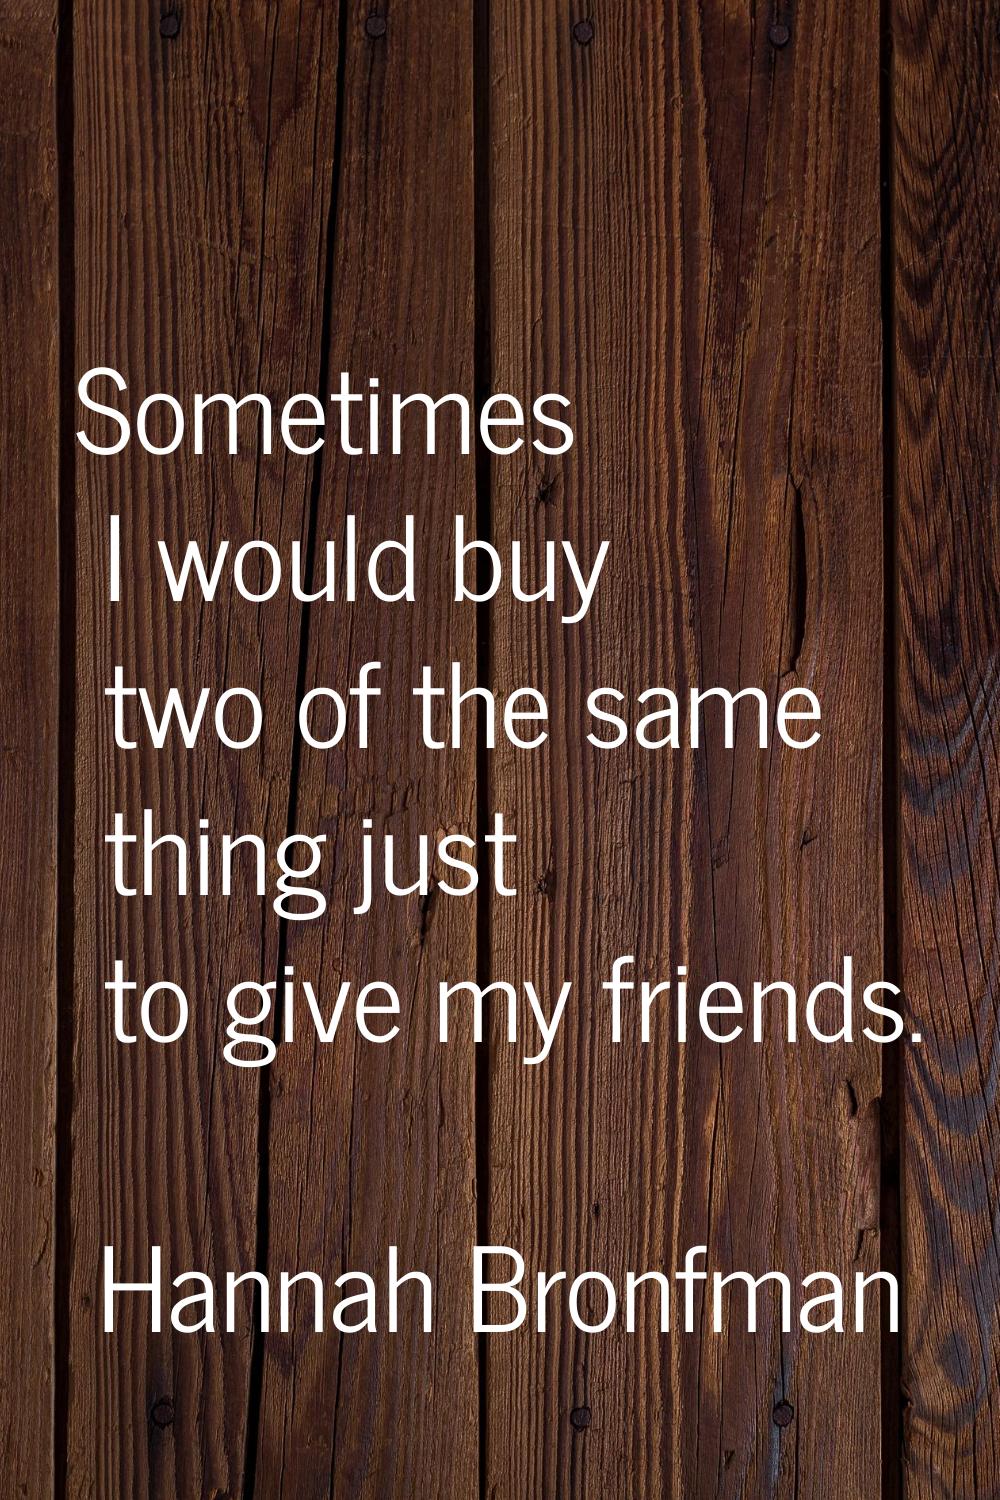 Sometimes I would buy two of the same thing just to give my friends.